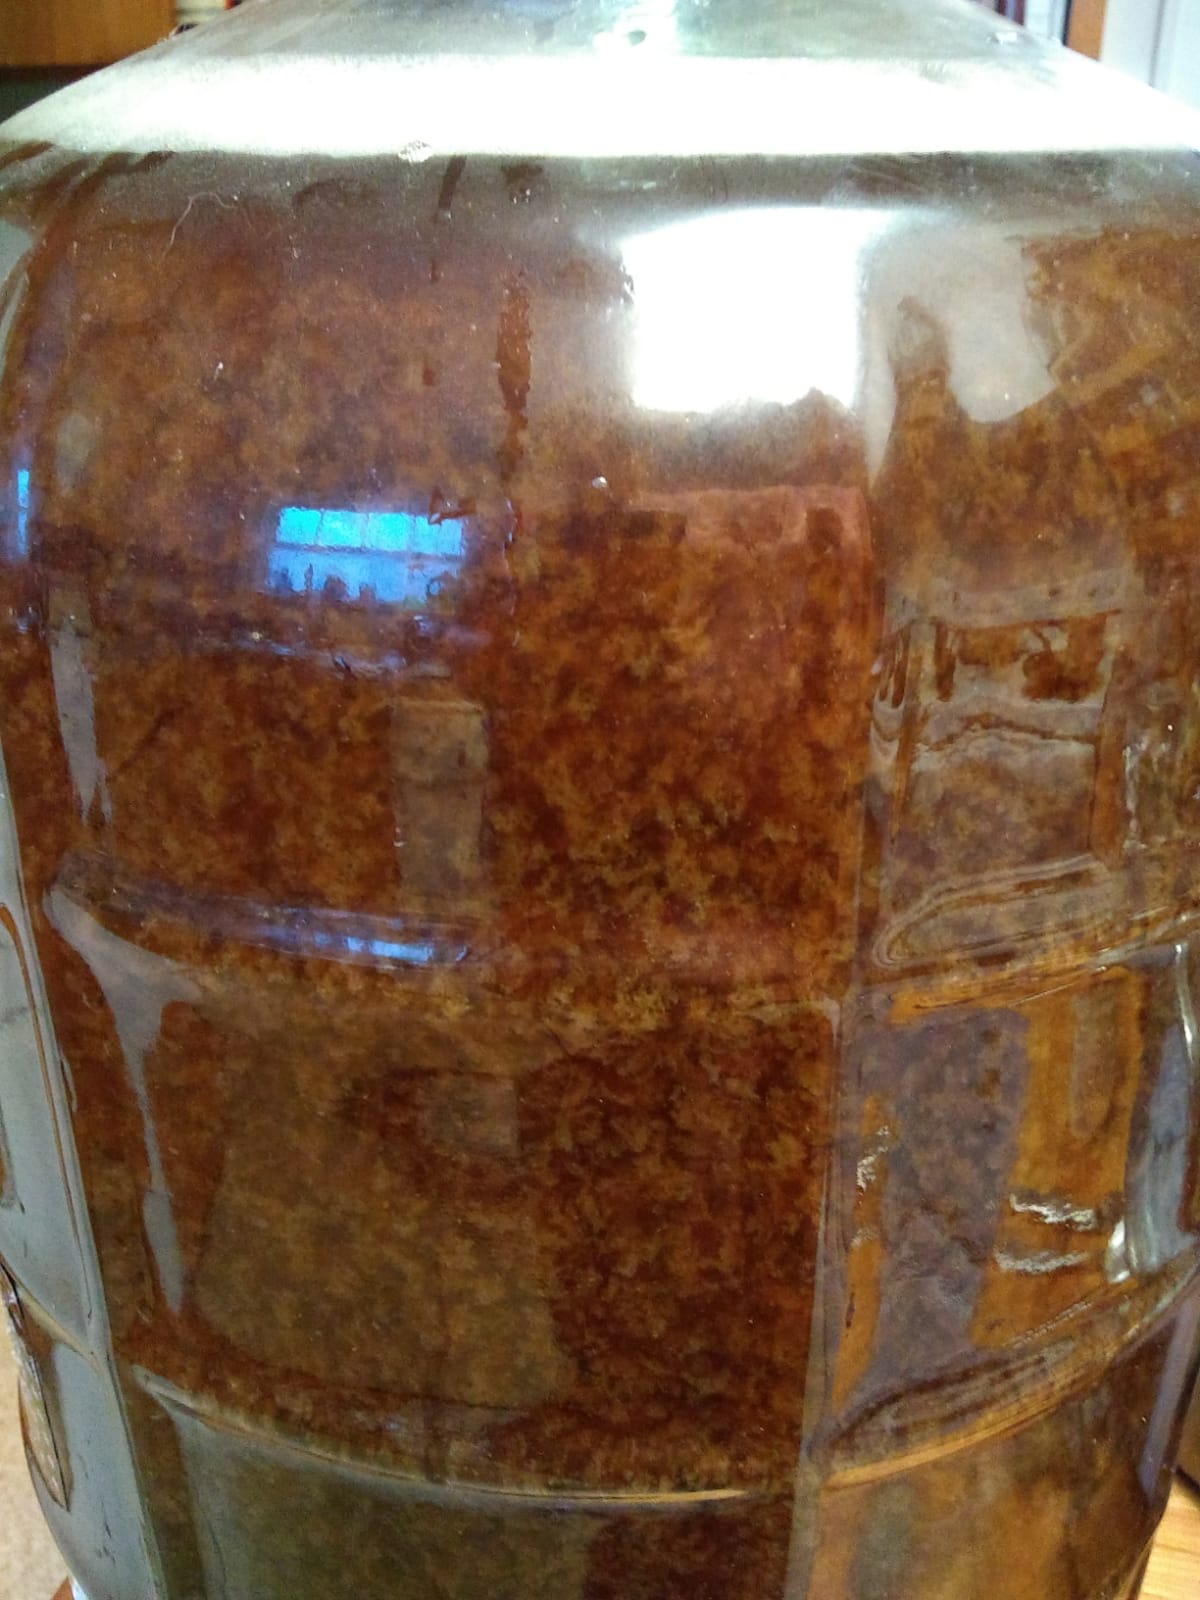 A view of the fermentation bottle with wort and flocks of yeast